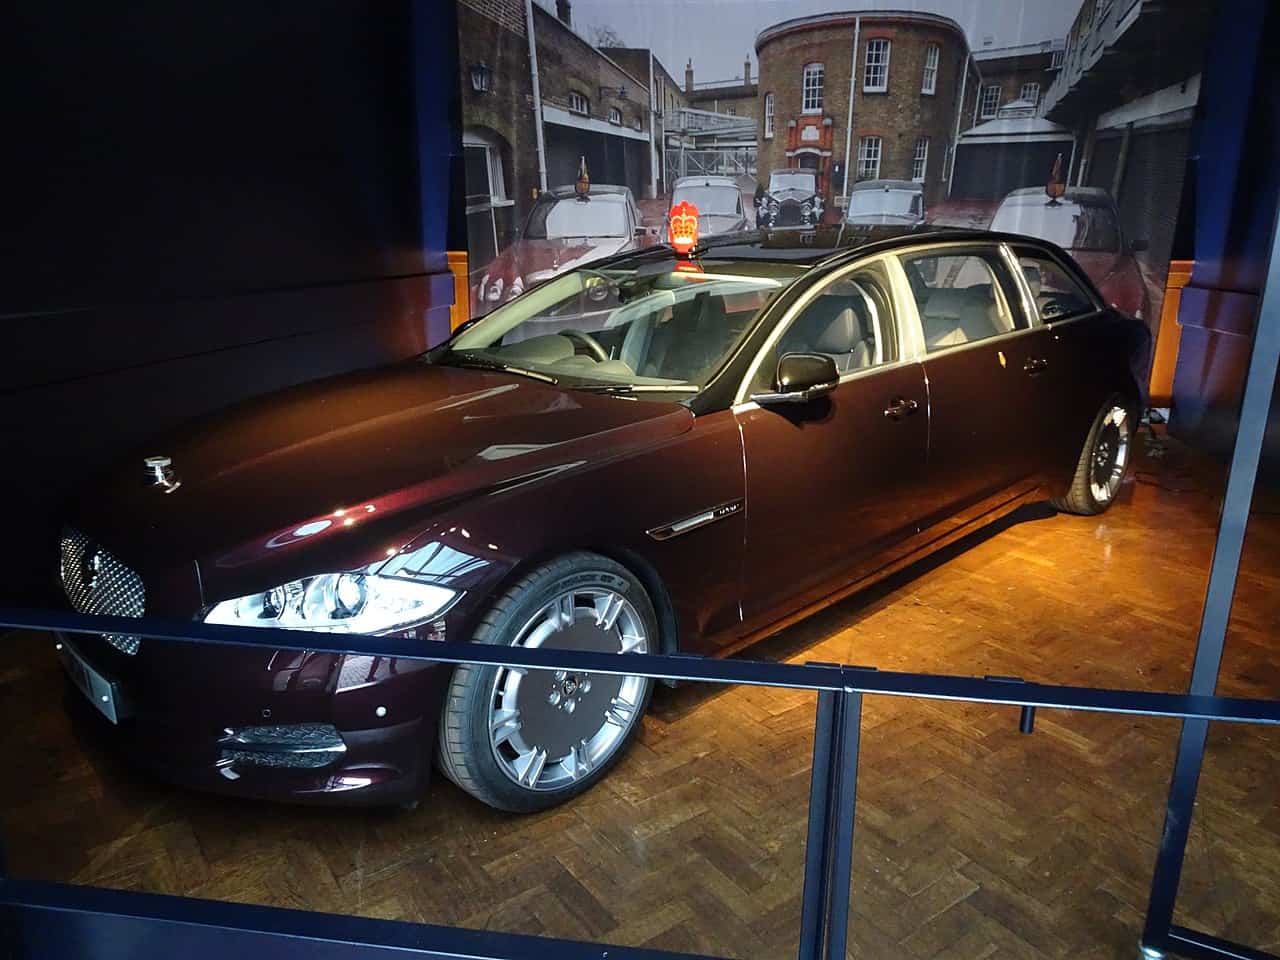 One of two 2012 Jaguar XJ Limousines on display at the Royal Mews. Image source: Wikimedua user ~Ealasaid~ under the Creative Commons Attribution 2.0 Generic license.